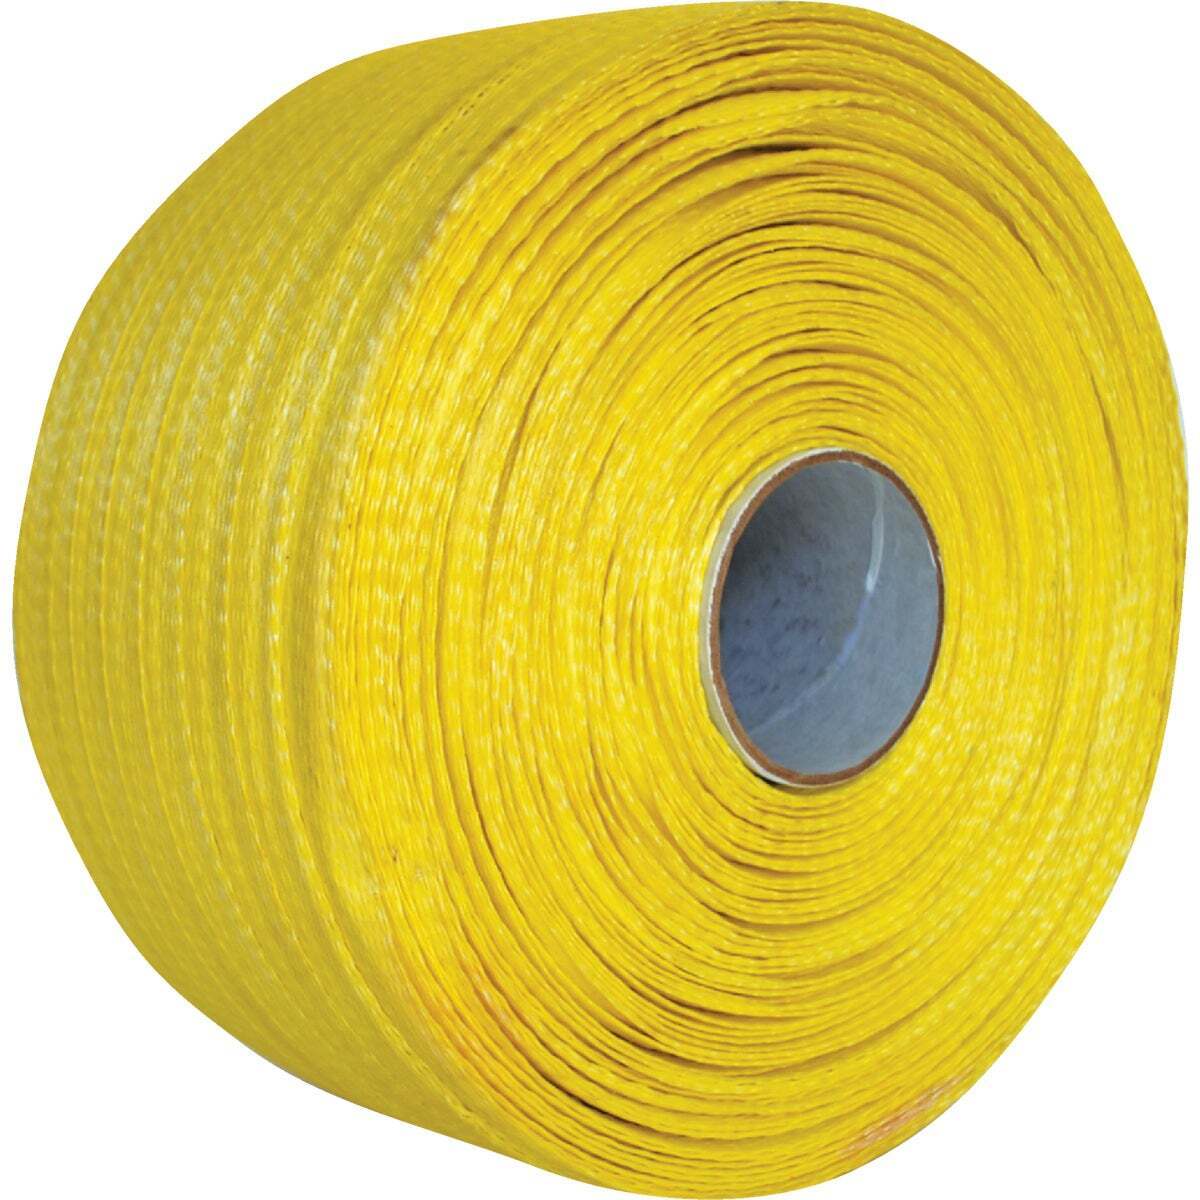 Samuel 3/4 In. x 1665 Ft. Yellow Cord Strapping (2-Pack) 114000 66WXL samuel